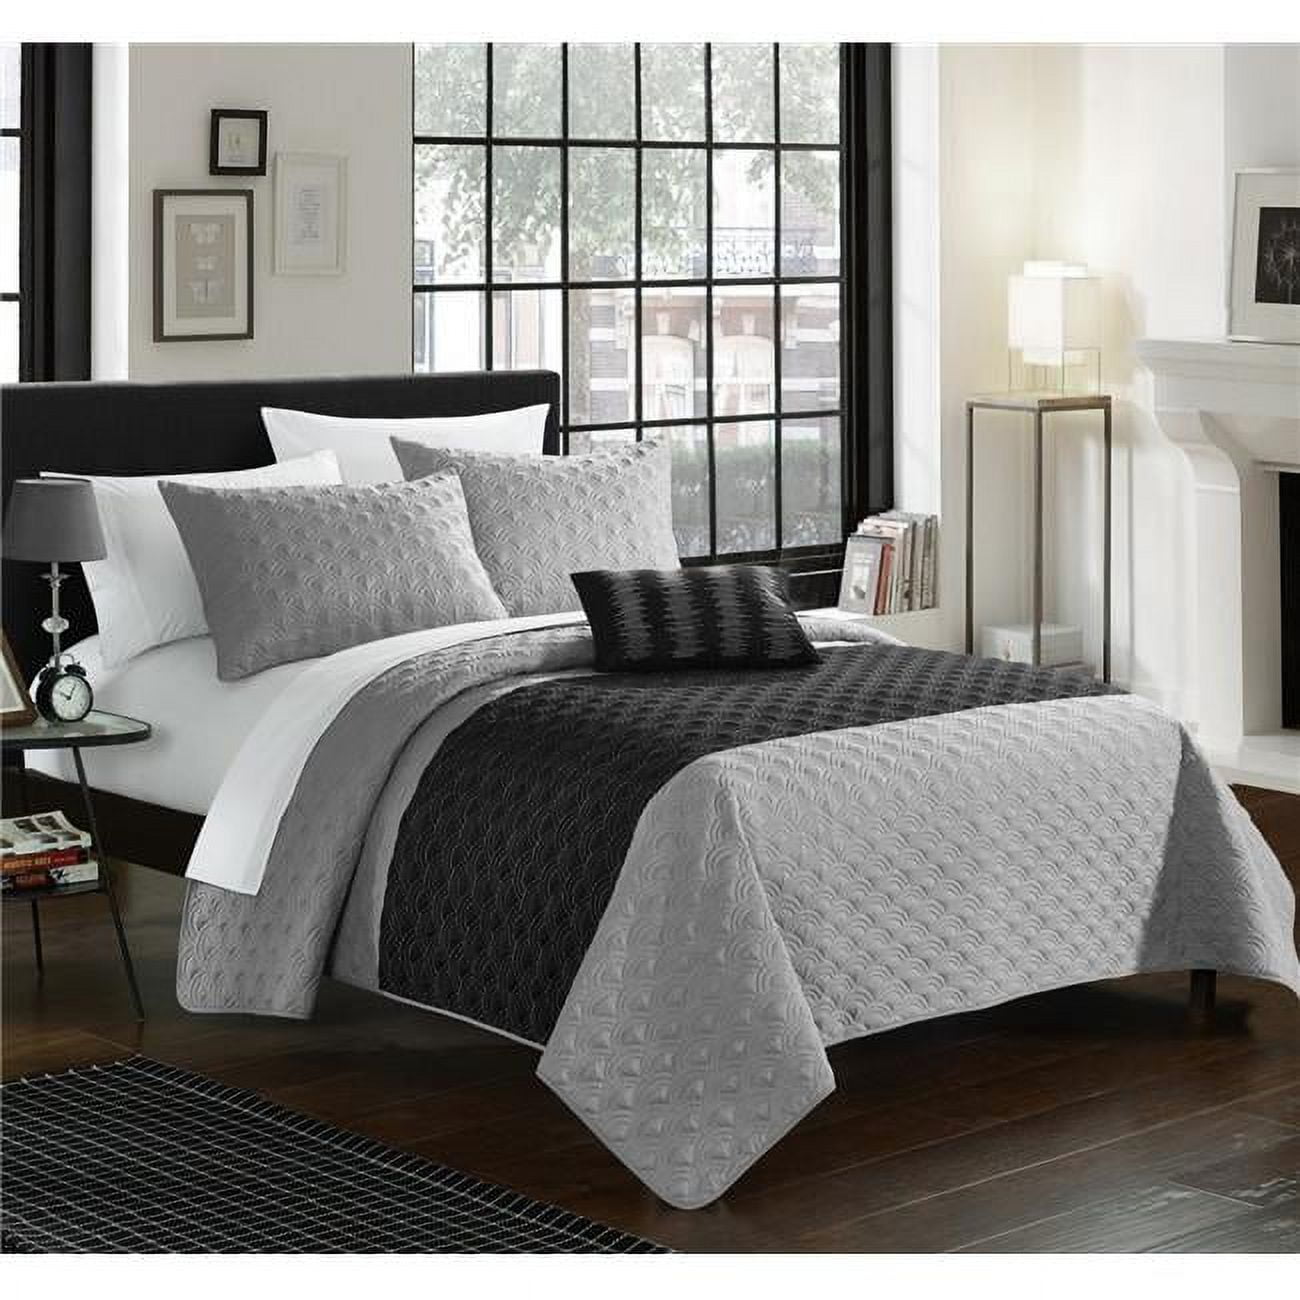 Qs1976-us 4 Piece Ellias Contemporary Two Tone Geometric Embroidered Quilted Bed Cover Set, Grey